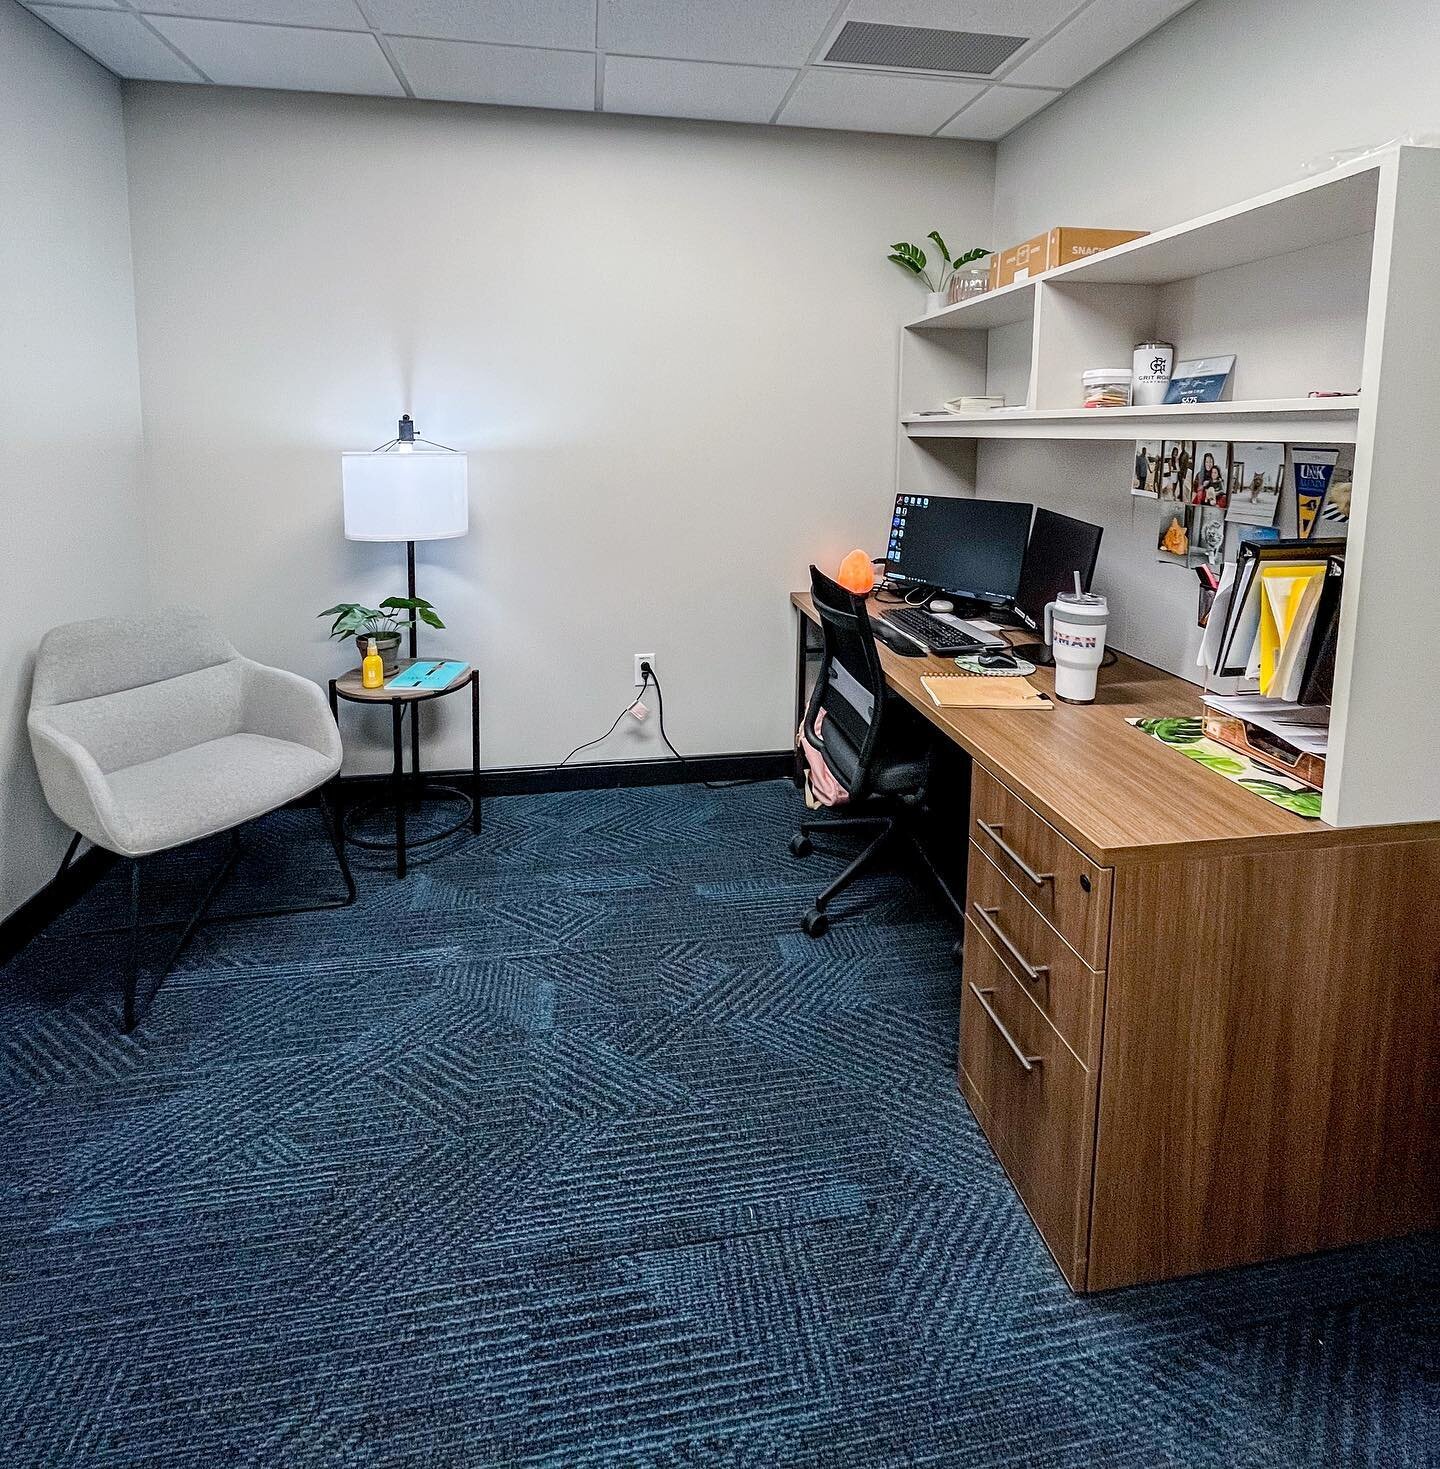 We provide you with a desk and task chair in our private office, but we welcome you to make your space YOURS! We love a comfortable and welcoming office!
#coworkingspace #coworkingomaha #privateoffice #thecollective